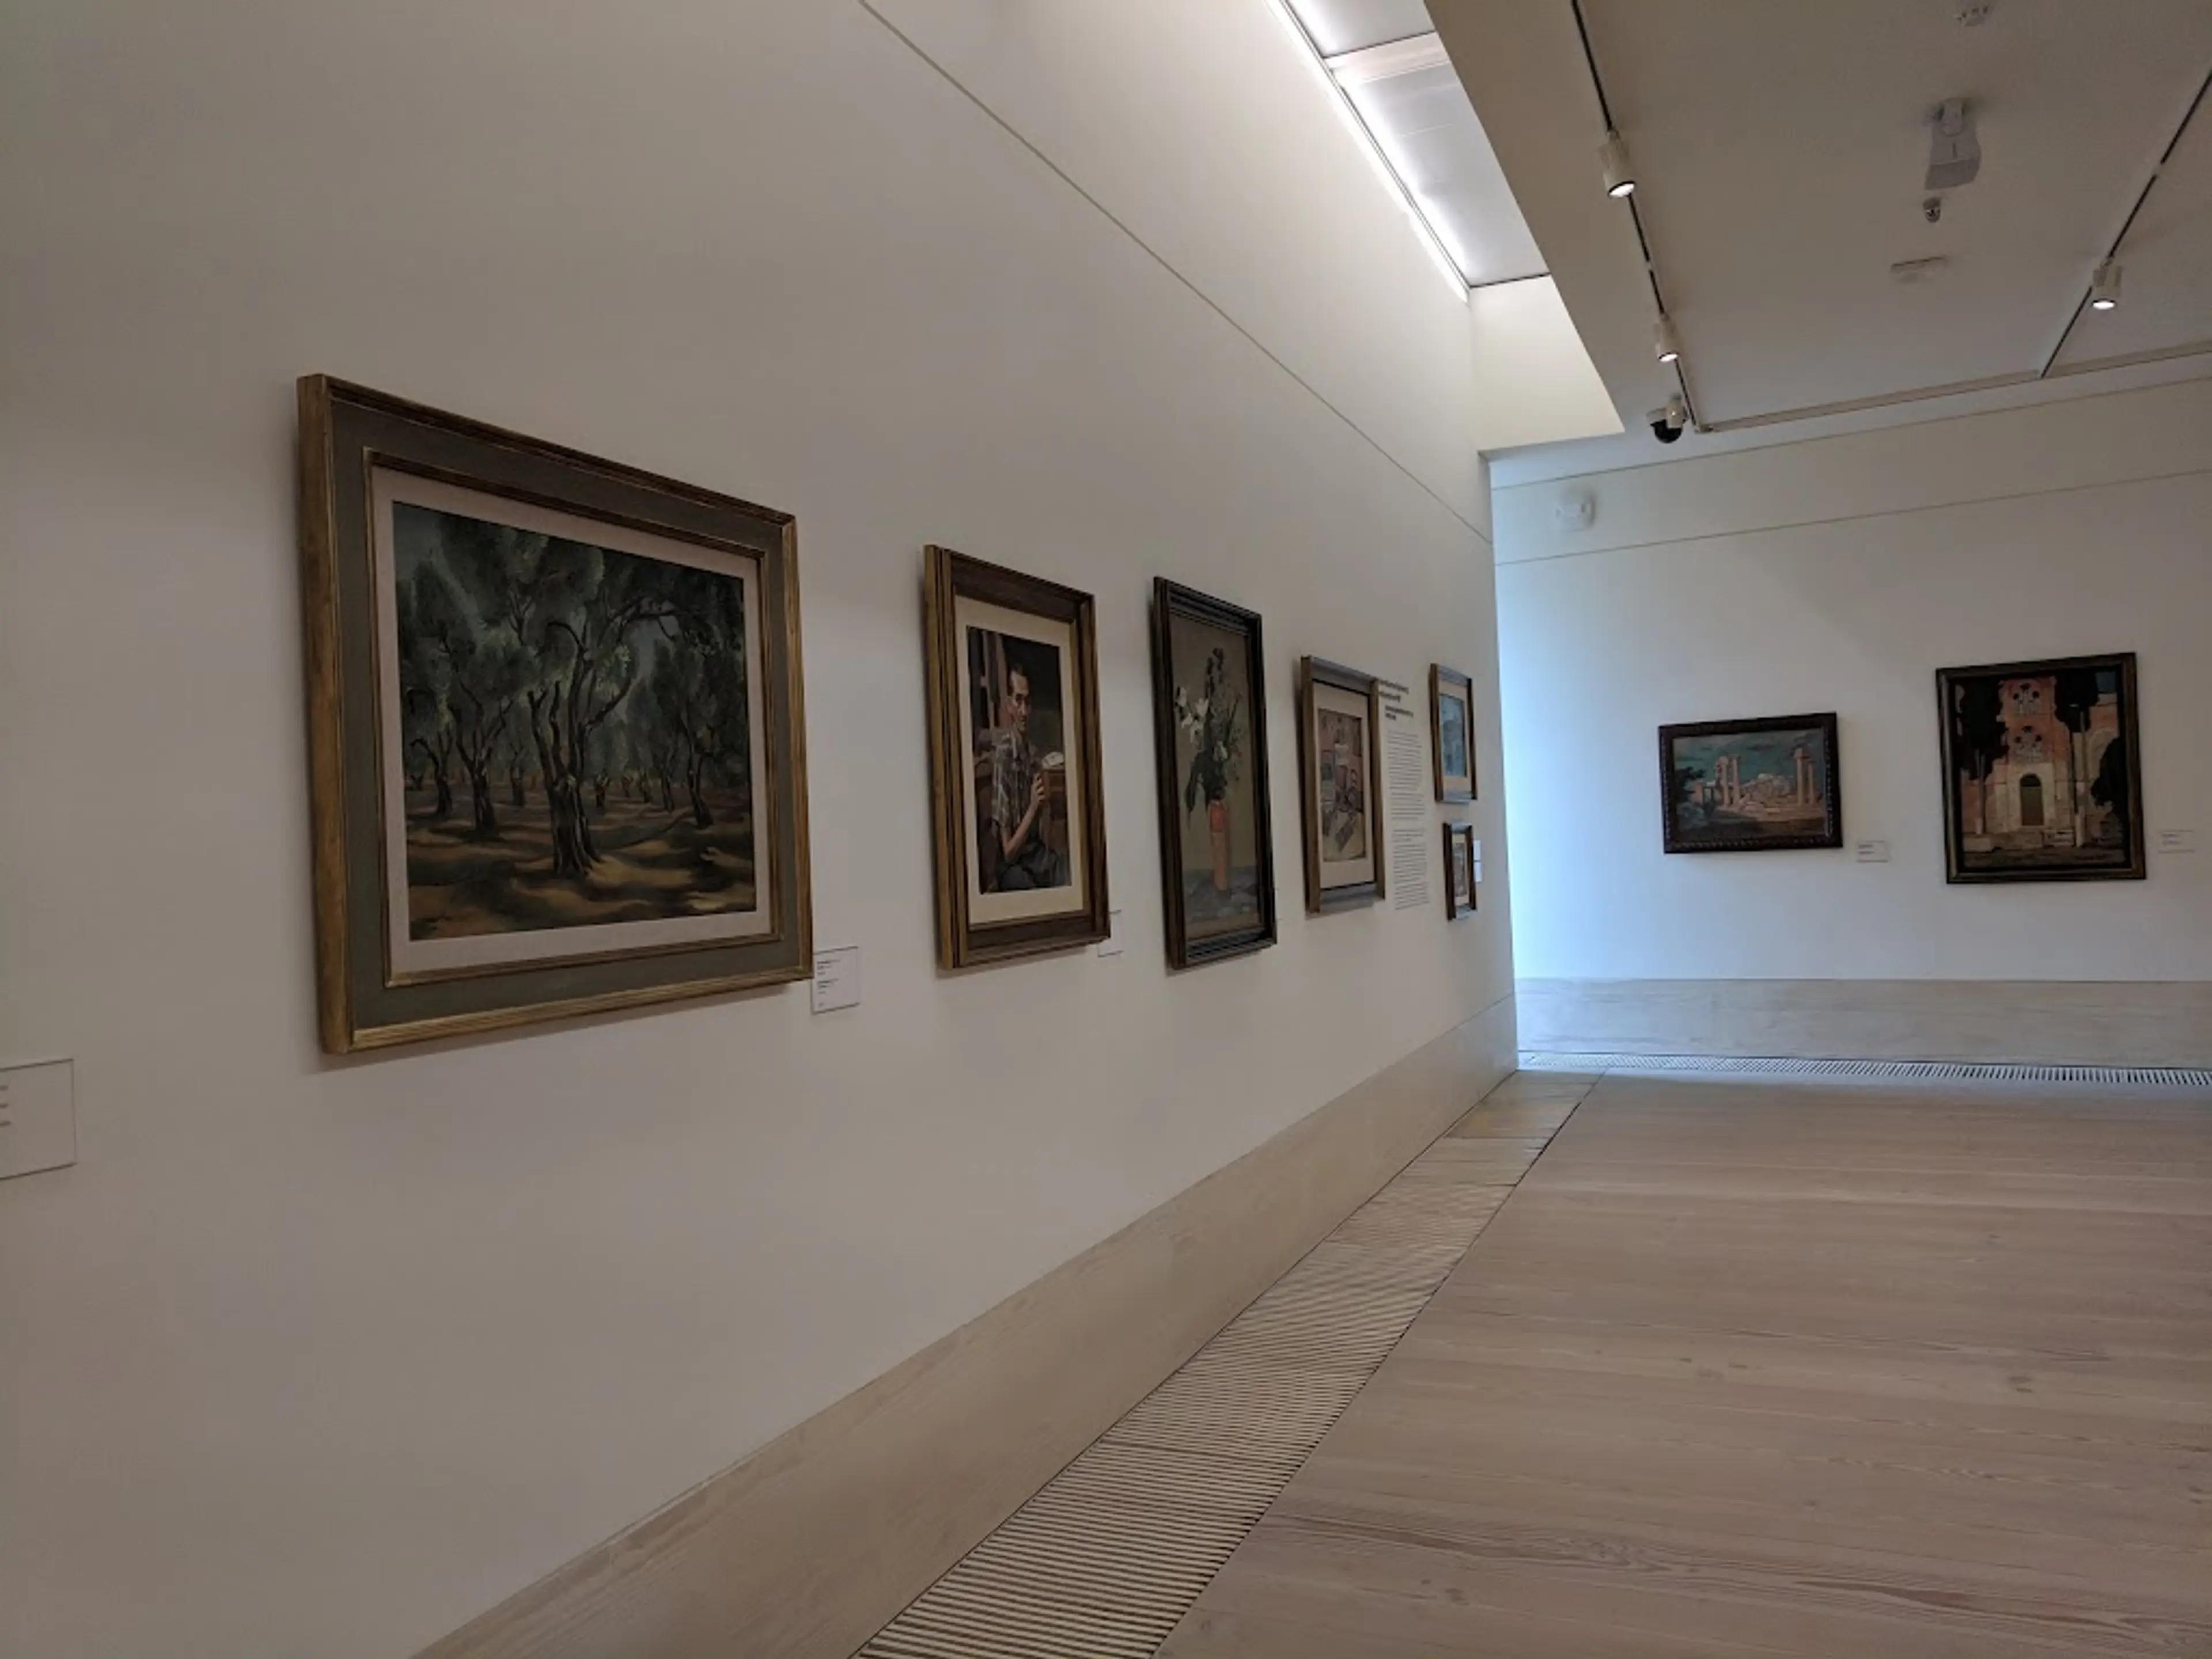 Local museums and art galleries